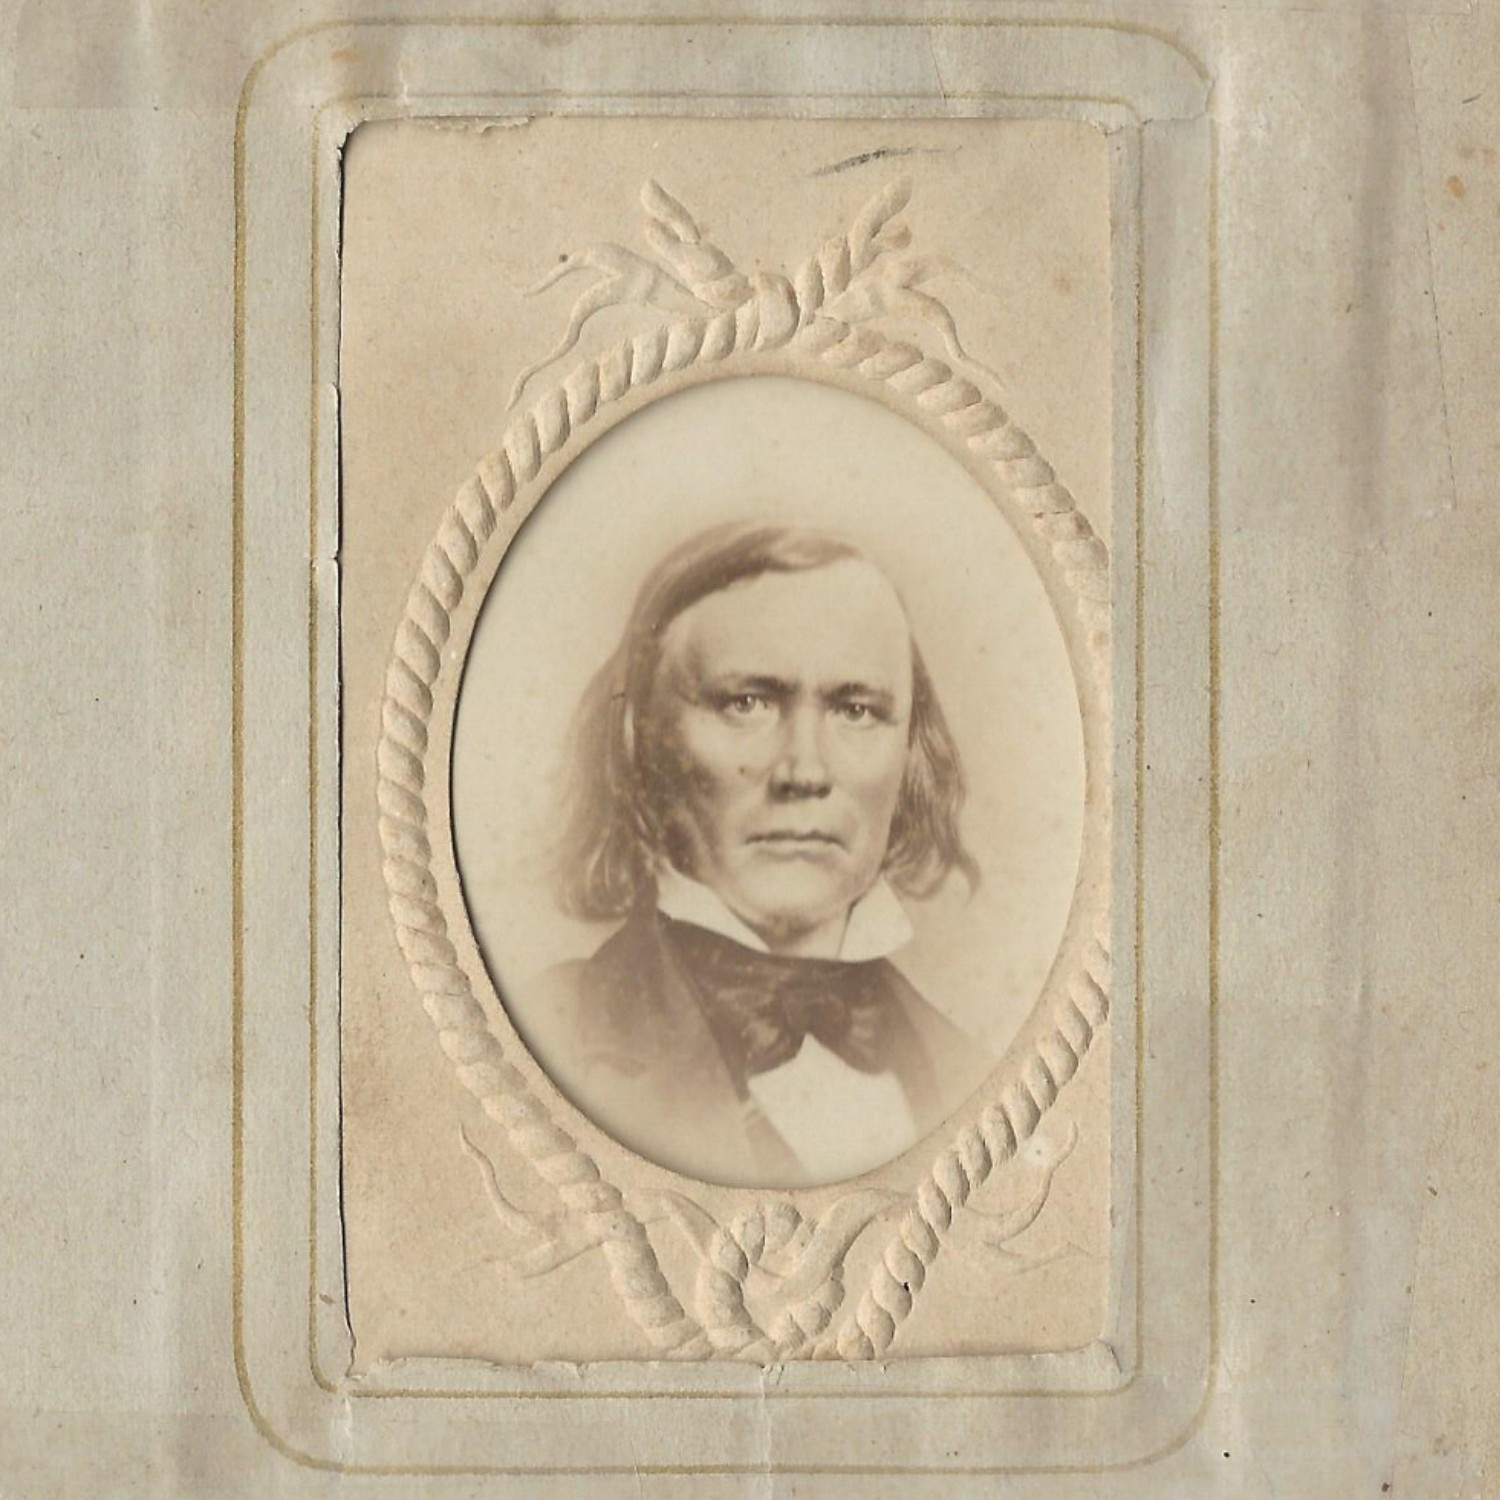 CDV photograph of Christopher Kit Carson published by E. & H. T. Anthony